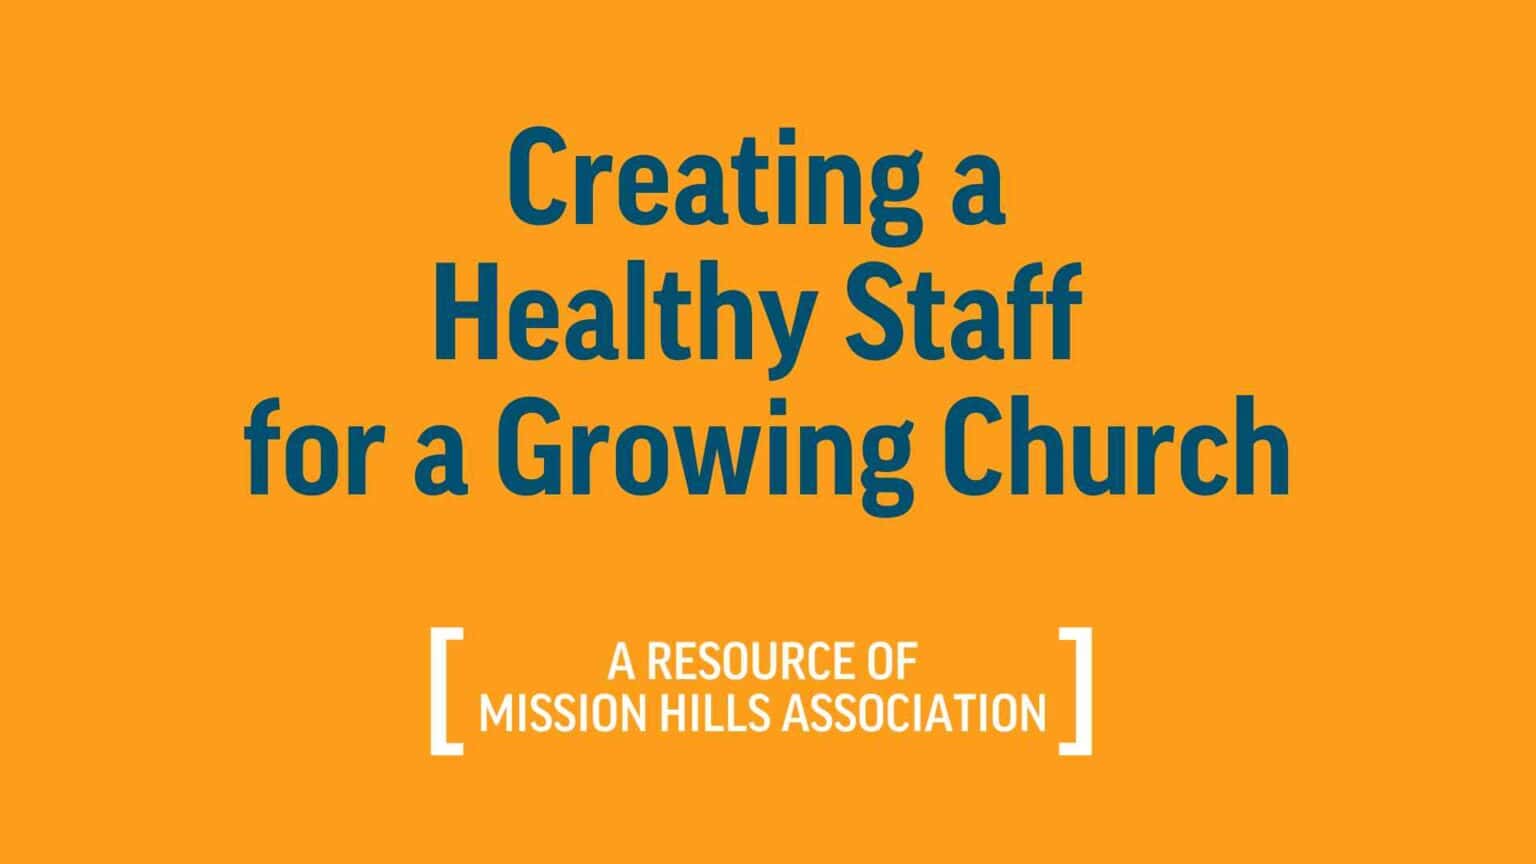 Creating a Healthy Staff for a Growing Church